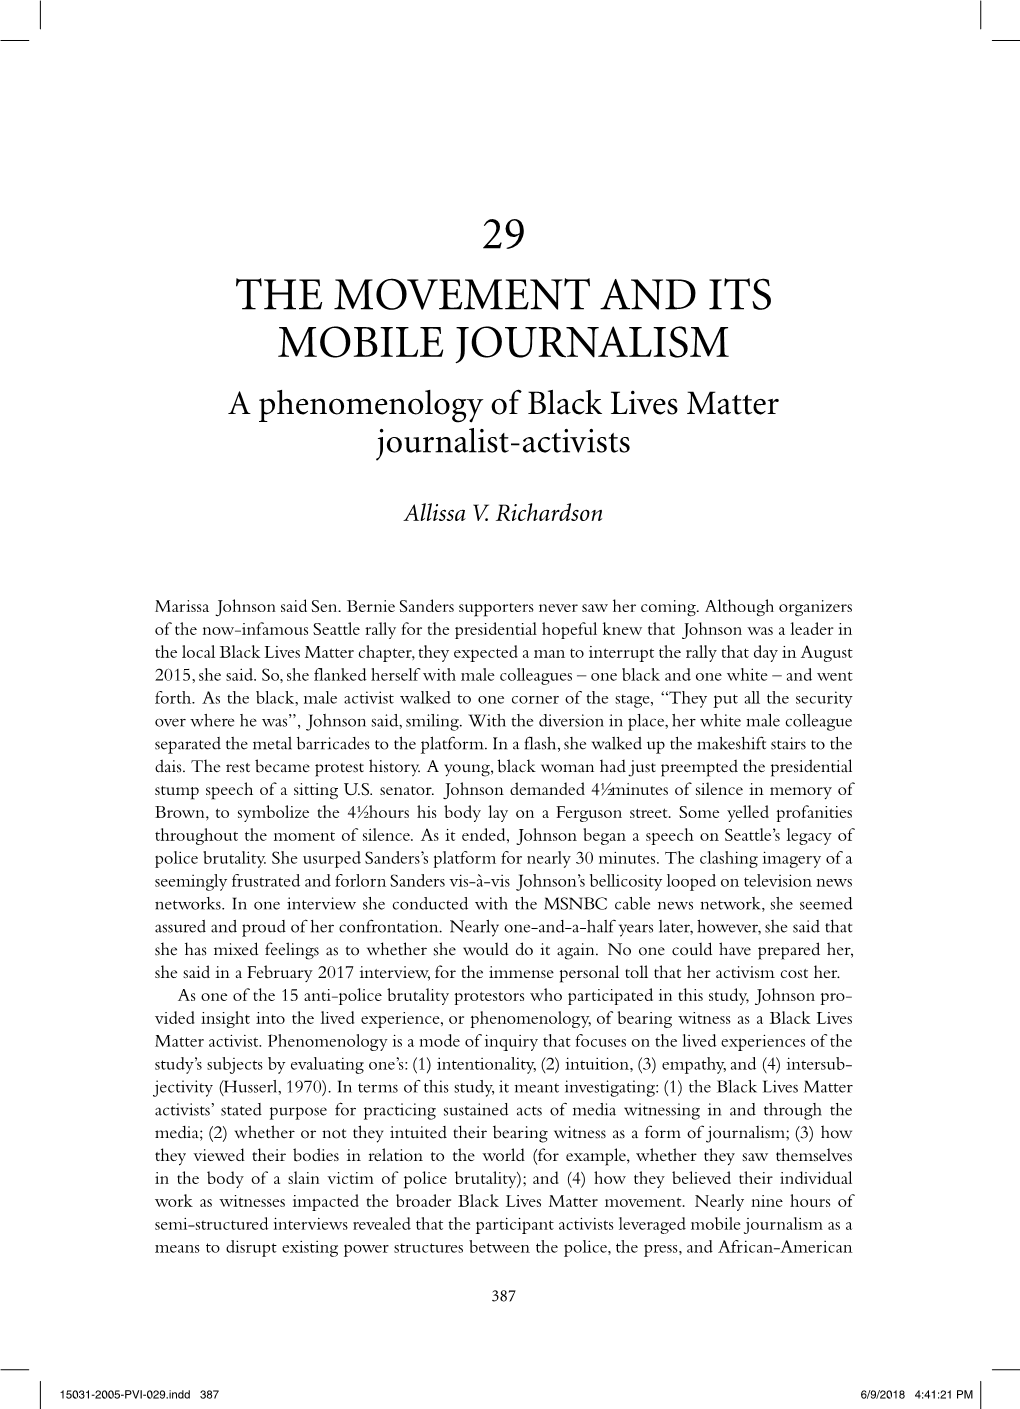 The Movement and Its Mobile Journalism: a Phenomenology of Black Lives Matter Journalist-Activists